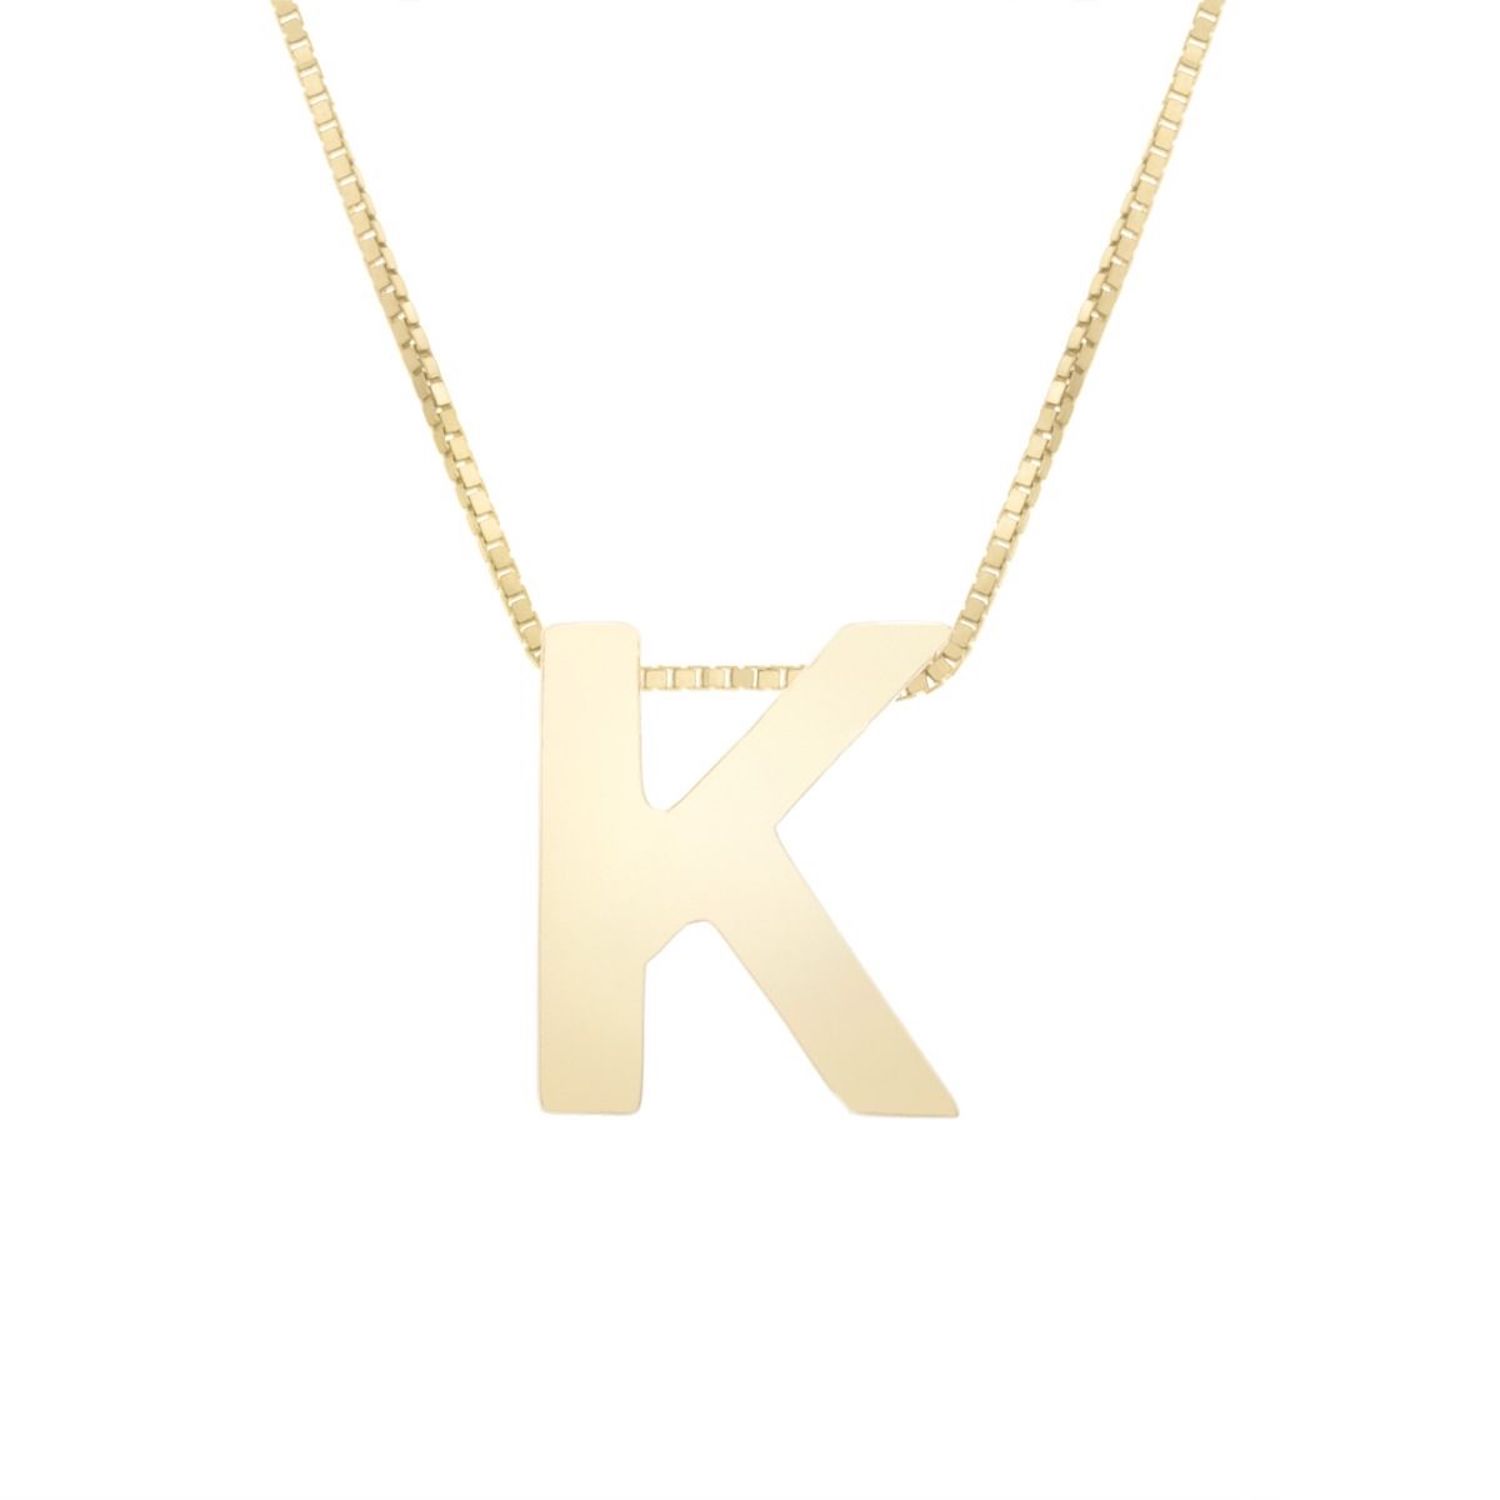 14K Yellow Gold Block Letter Initial Pendant Box Chain Necklace 16"-18" - K